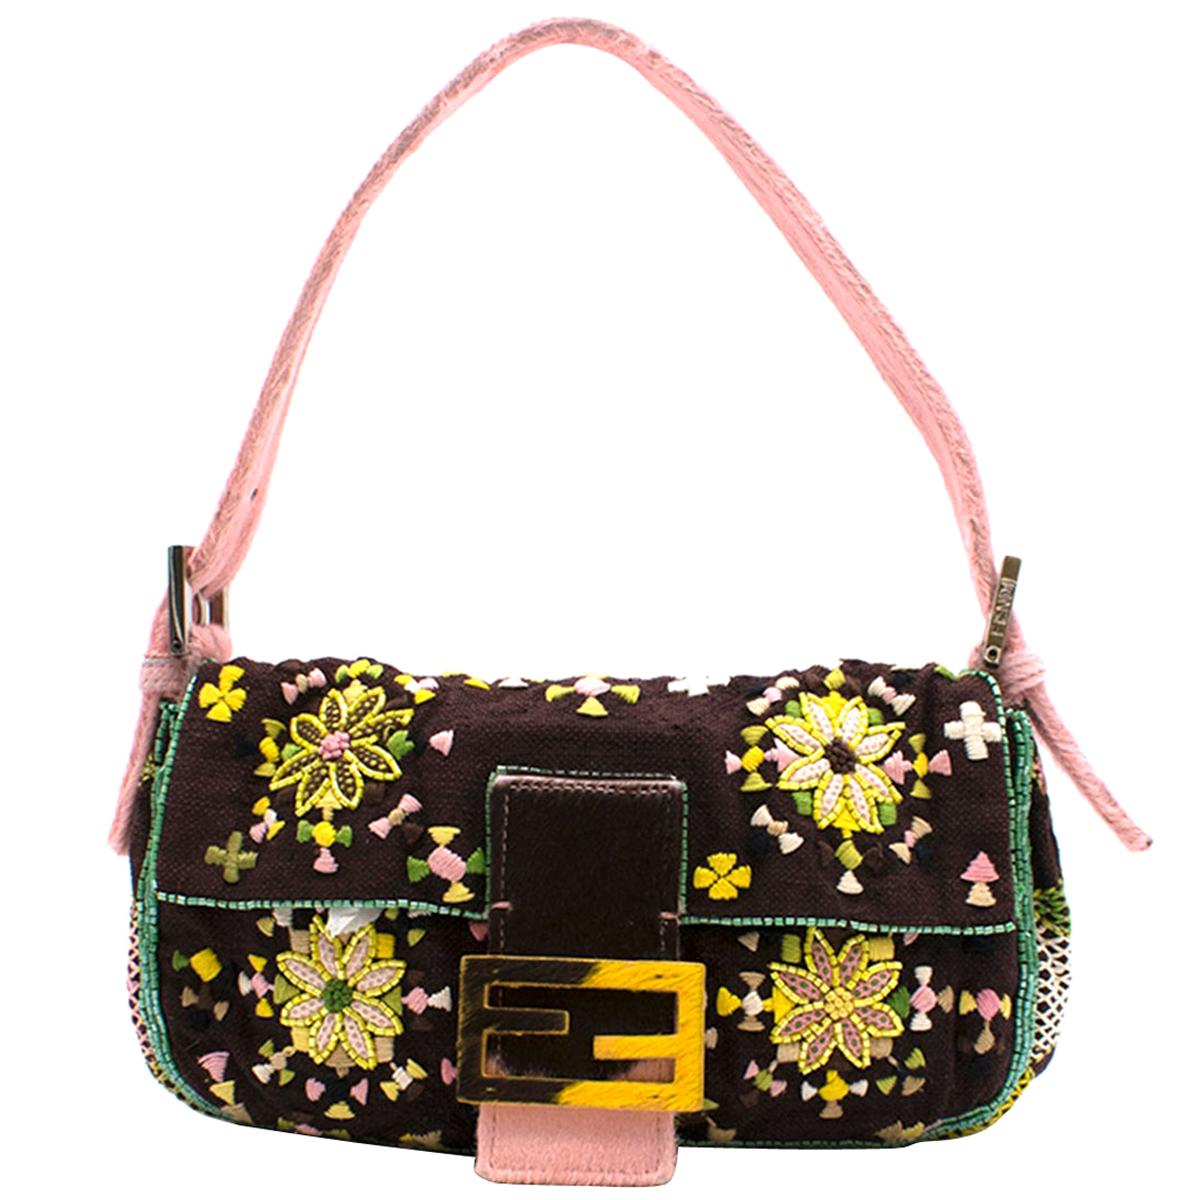 Fendi Brown & Yellow Floral Embroidered Baguette Bag	